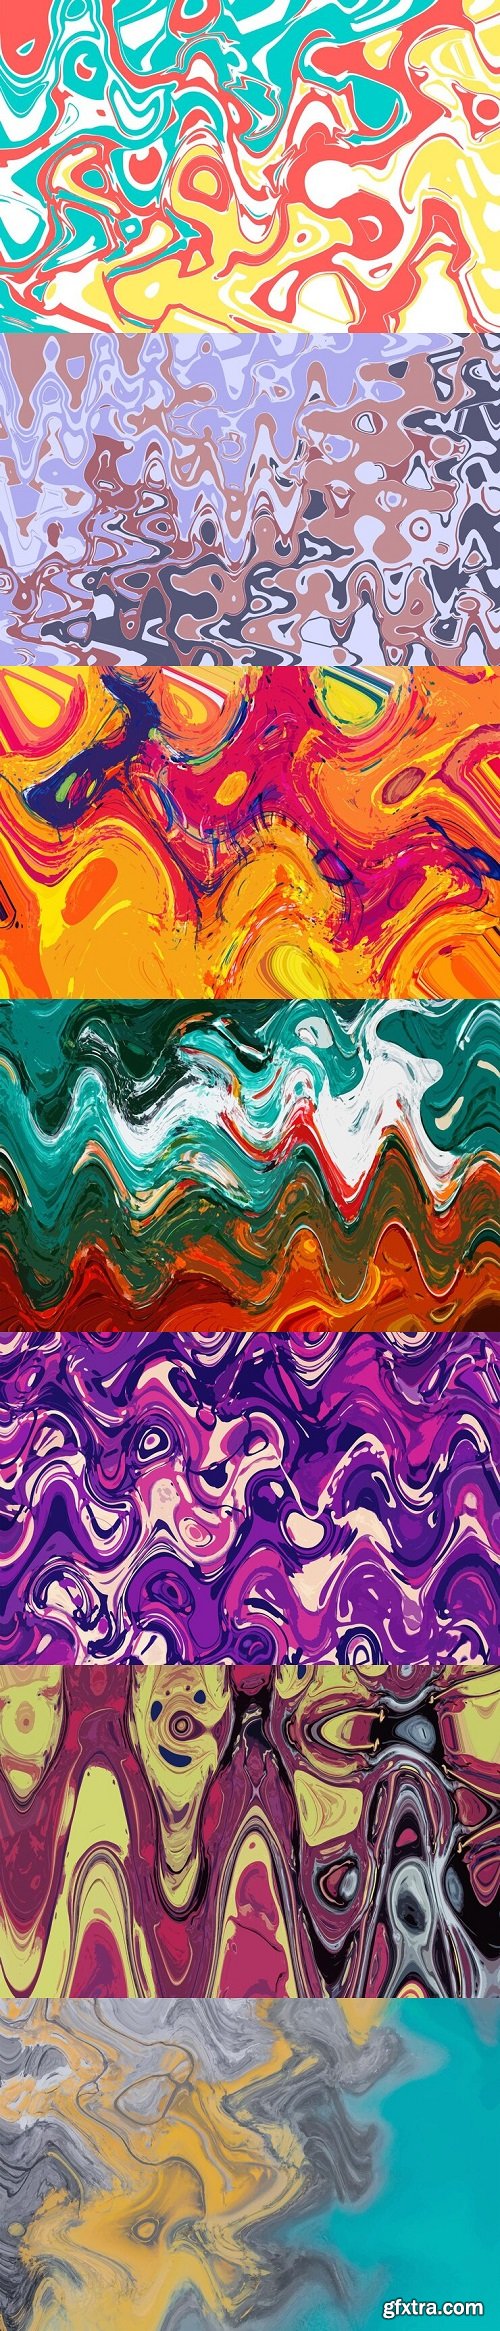 Colorful abstract wallpaper art background premium vector